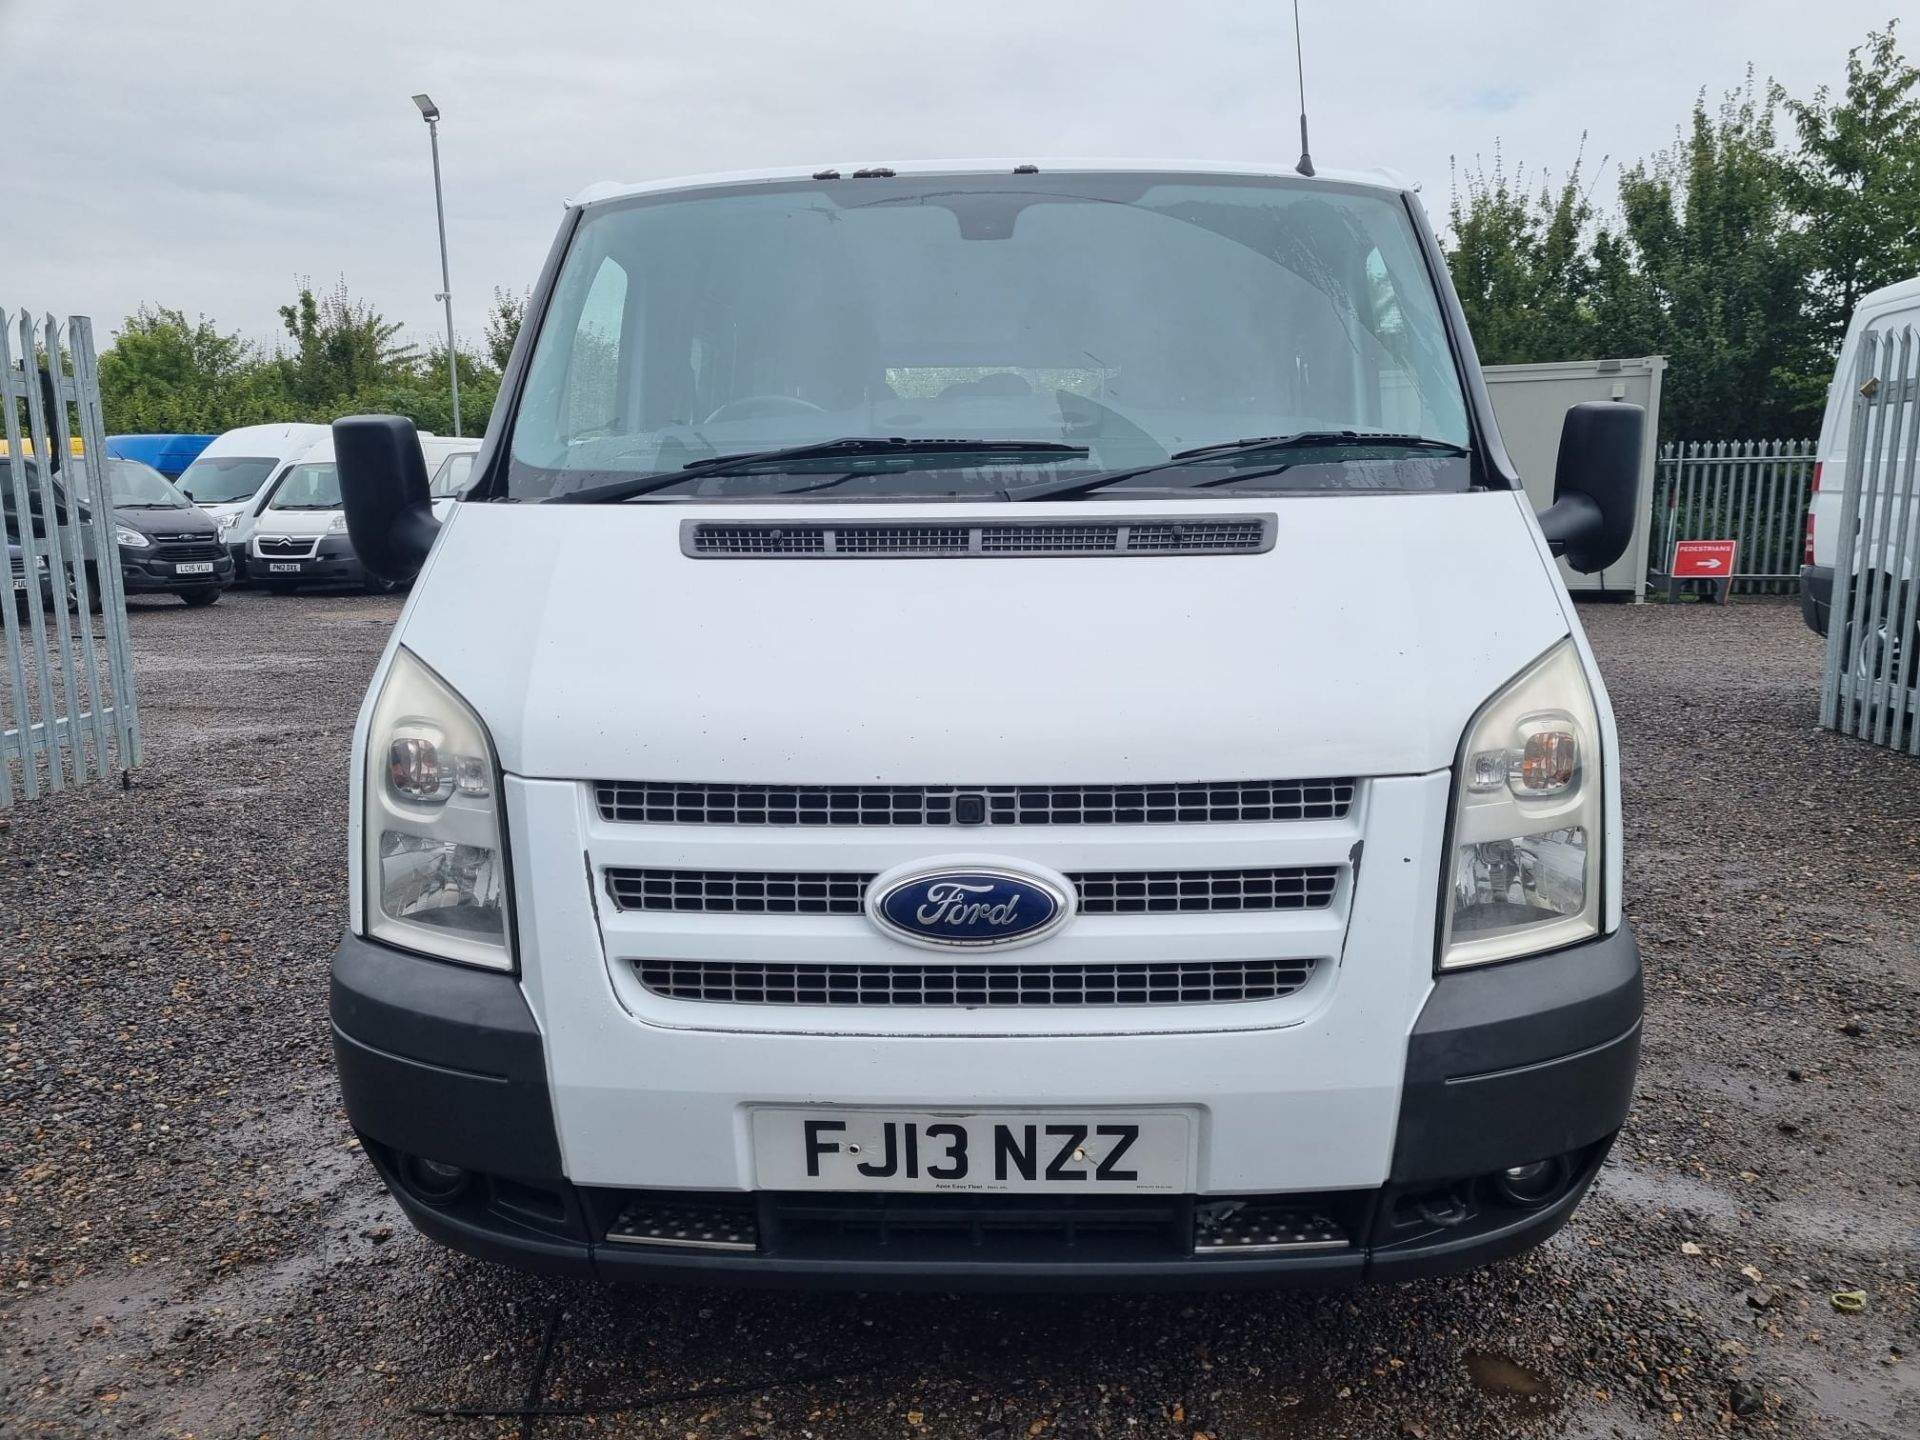 Ford Transit 2.2 TDCI Trend 2013 '13 Reg' 9 seats - Air Con - Cruise Control - Image 2 of 13